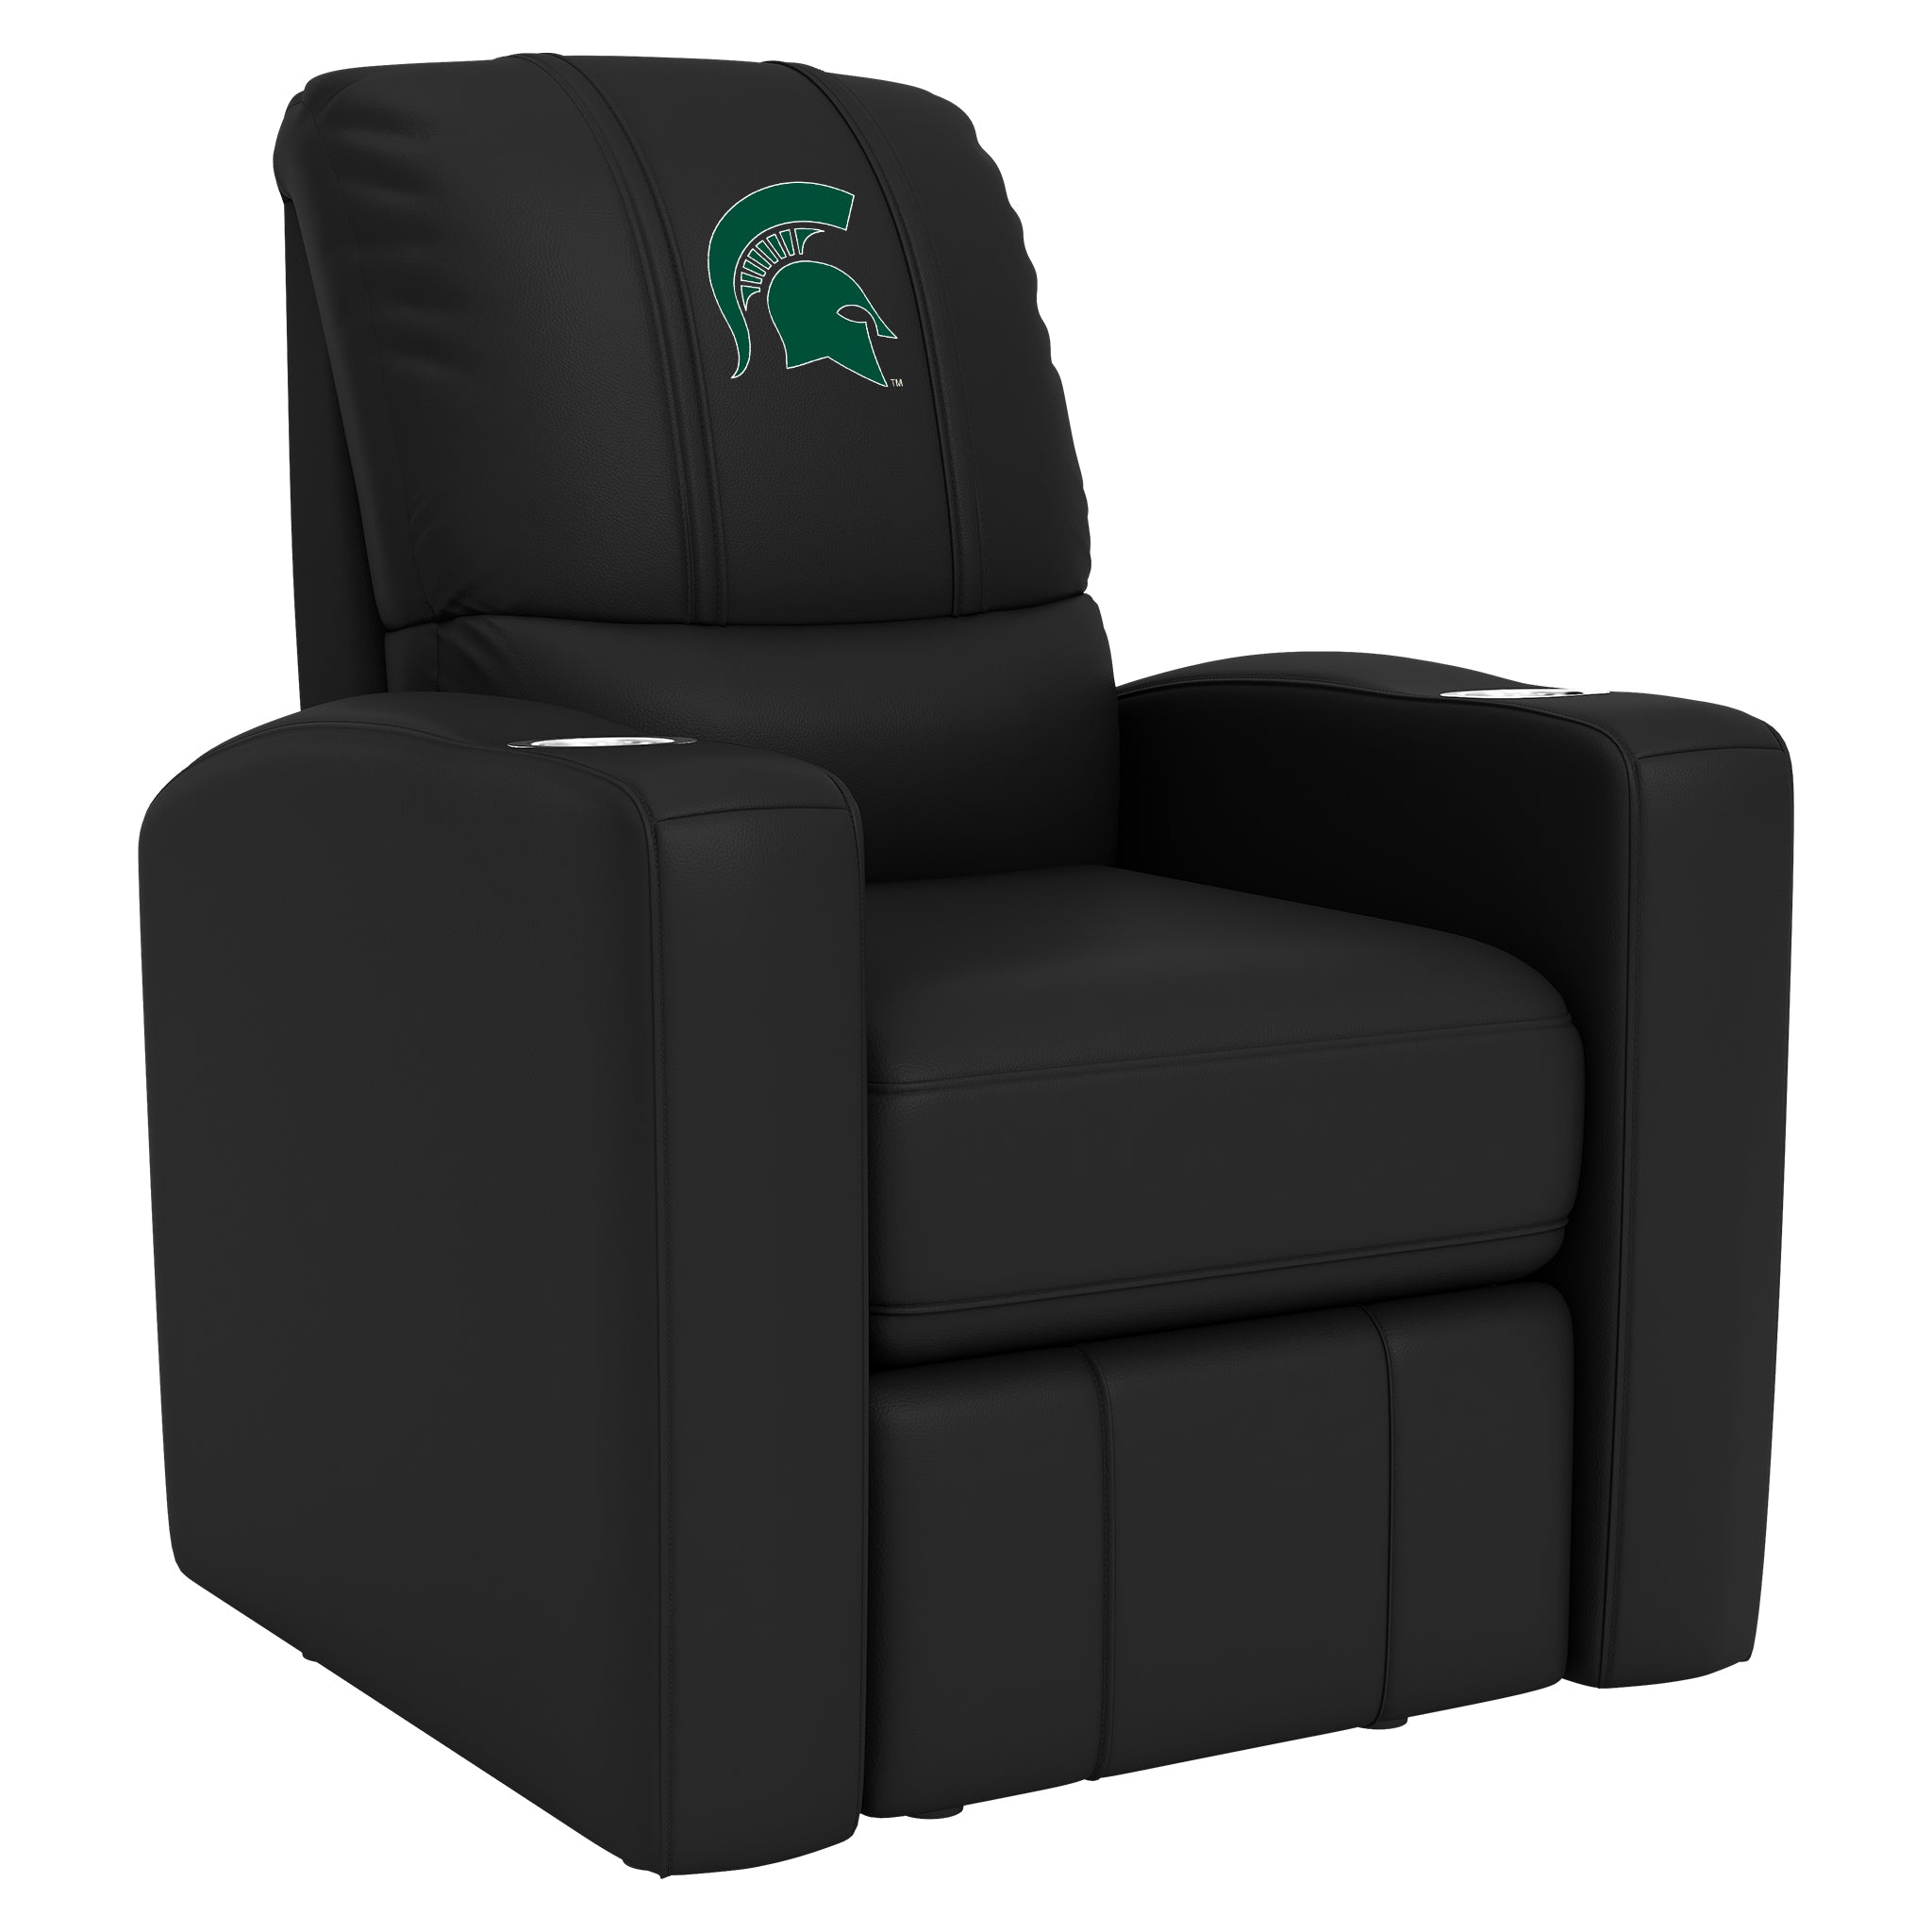 Michigan State Stealth Recliner with Michigan State Secondary Logo